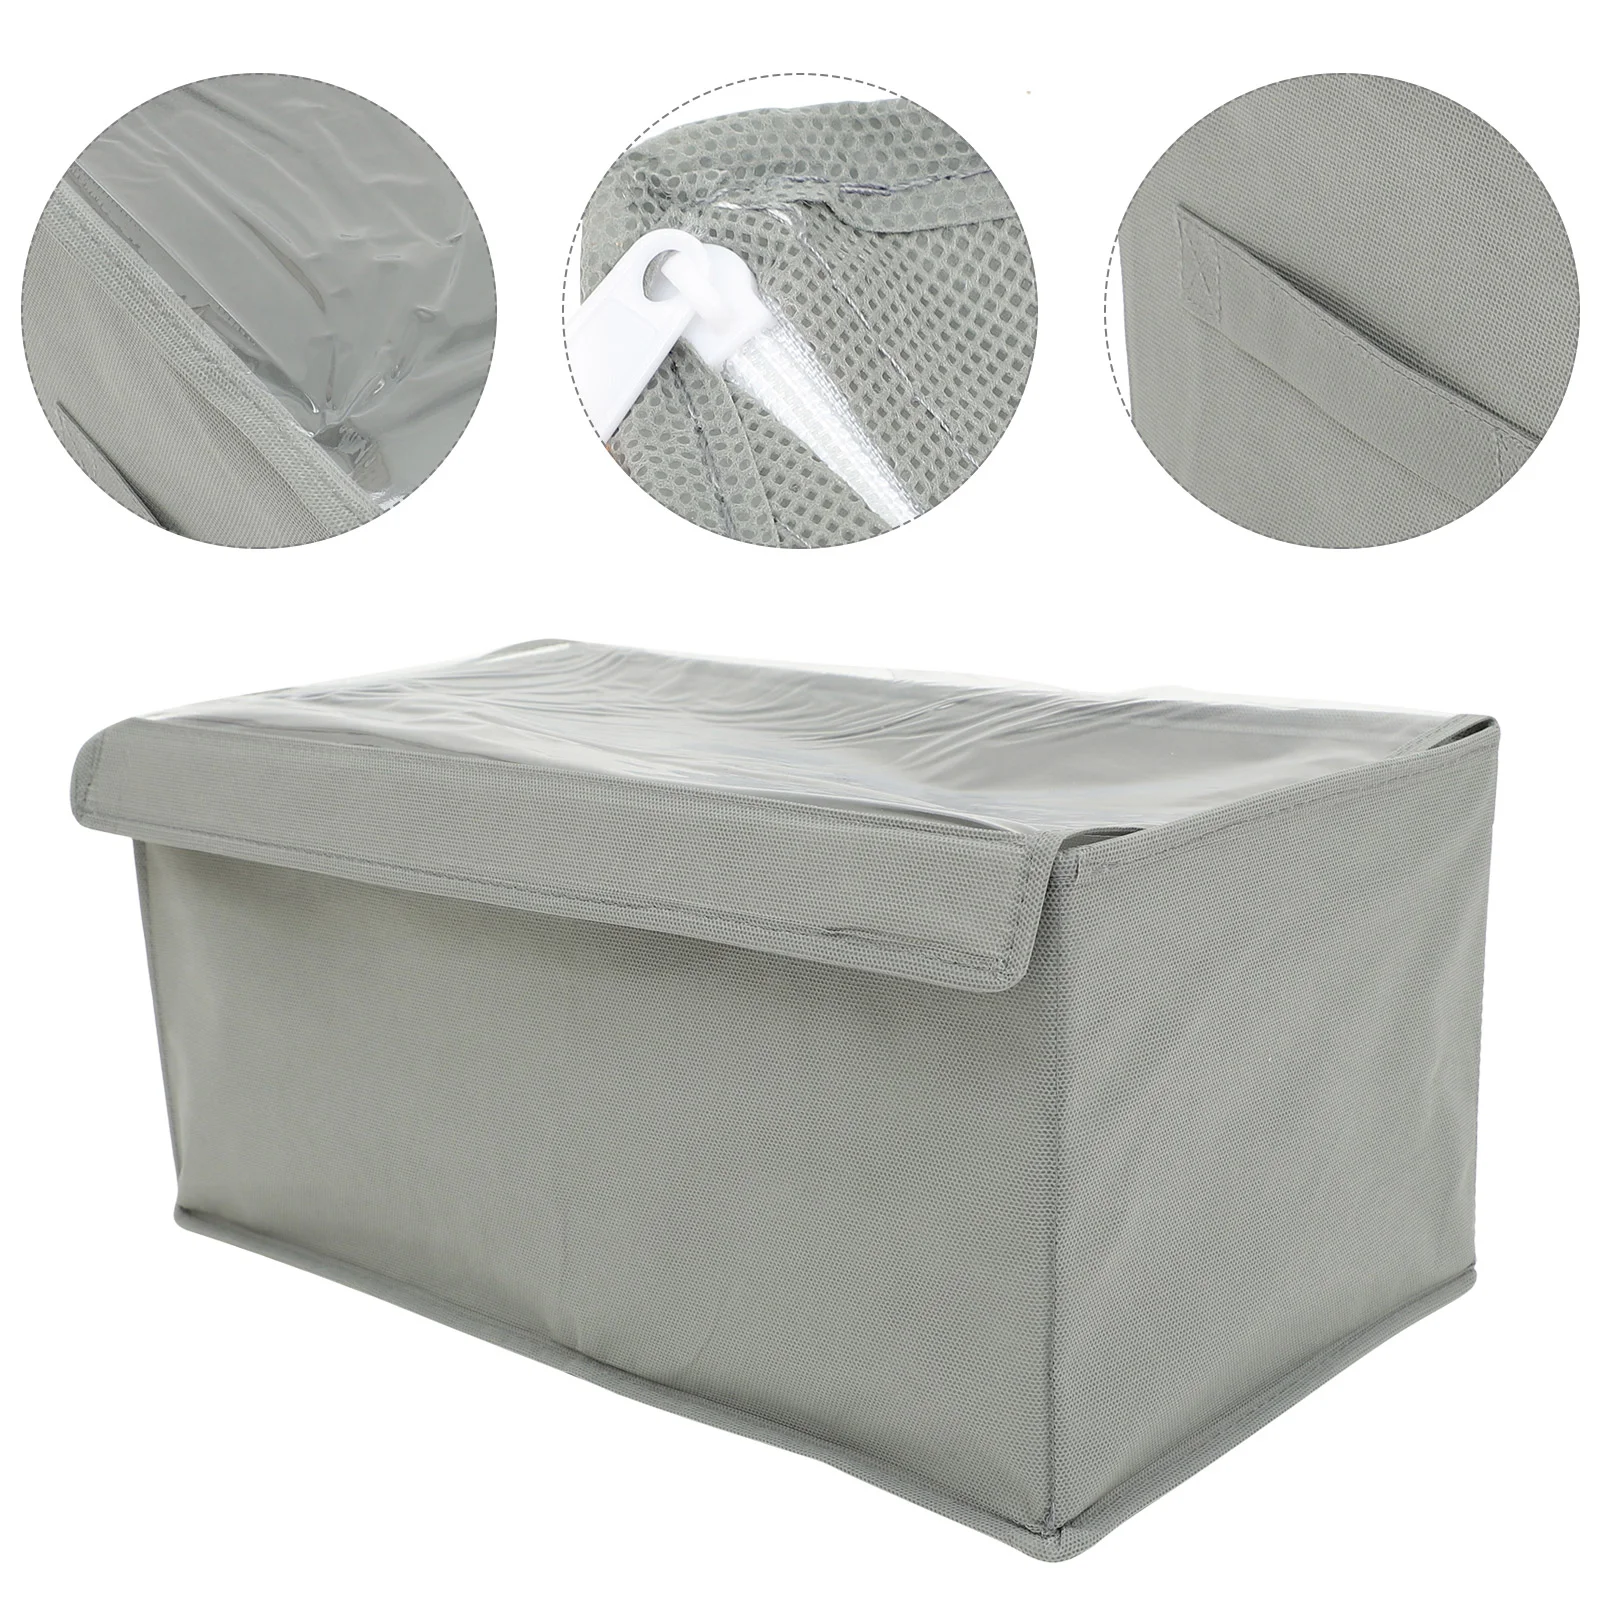 

Household Wardrobe Storage Box Collapsible Closet Bins Non-woven Fabric Container